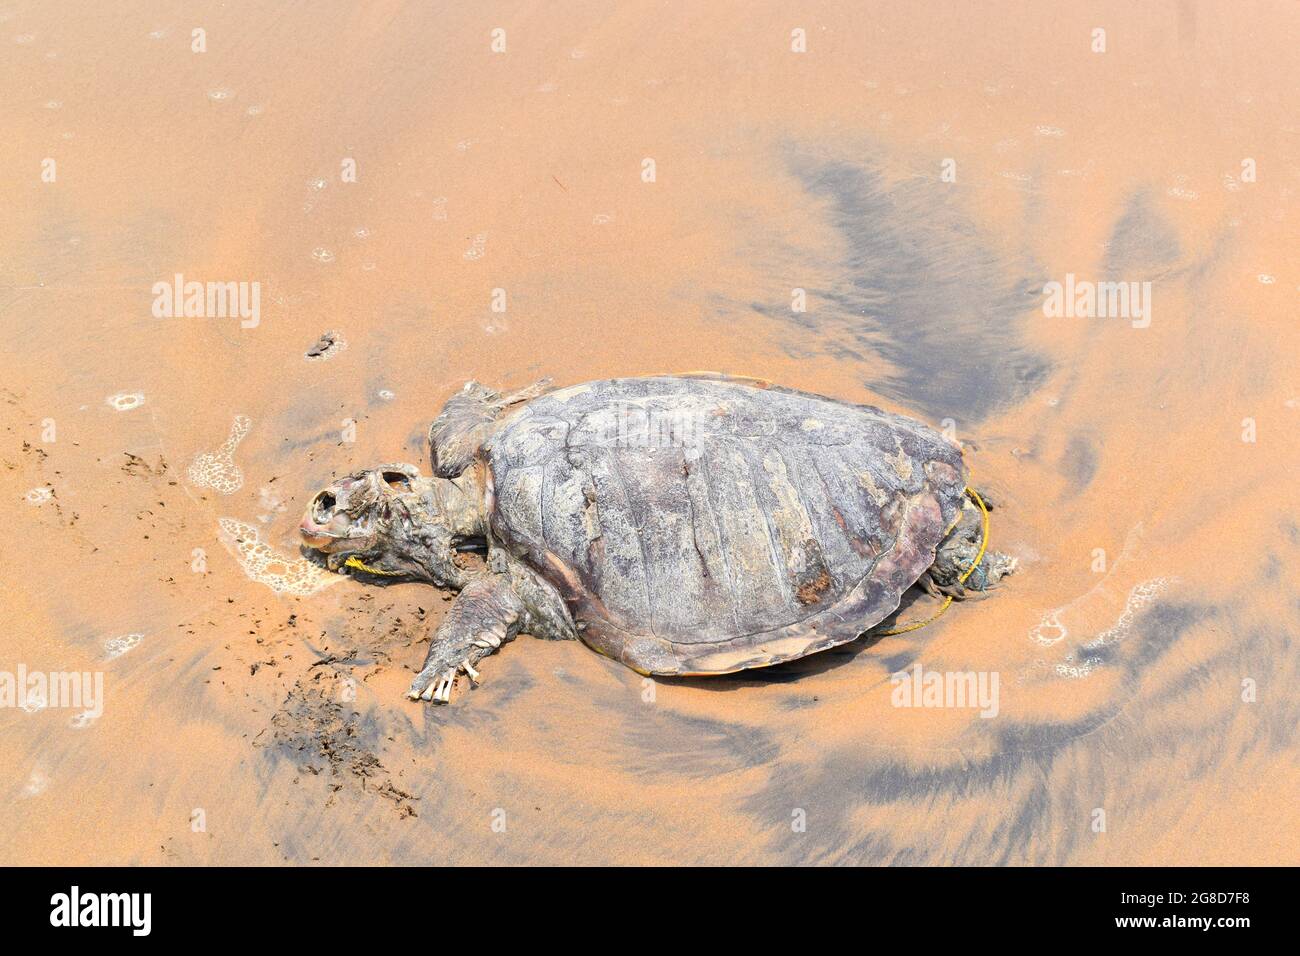 ORTOISE died in INDIAN OCEAN. Sad to share, in the Indian Ocean Tortoise (turtle), swam to shore and died on the shore. Stock Photo